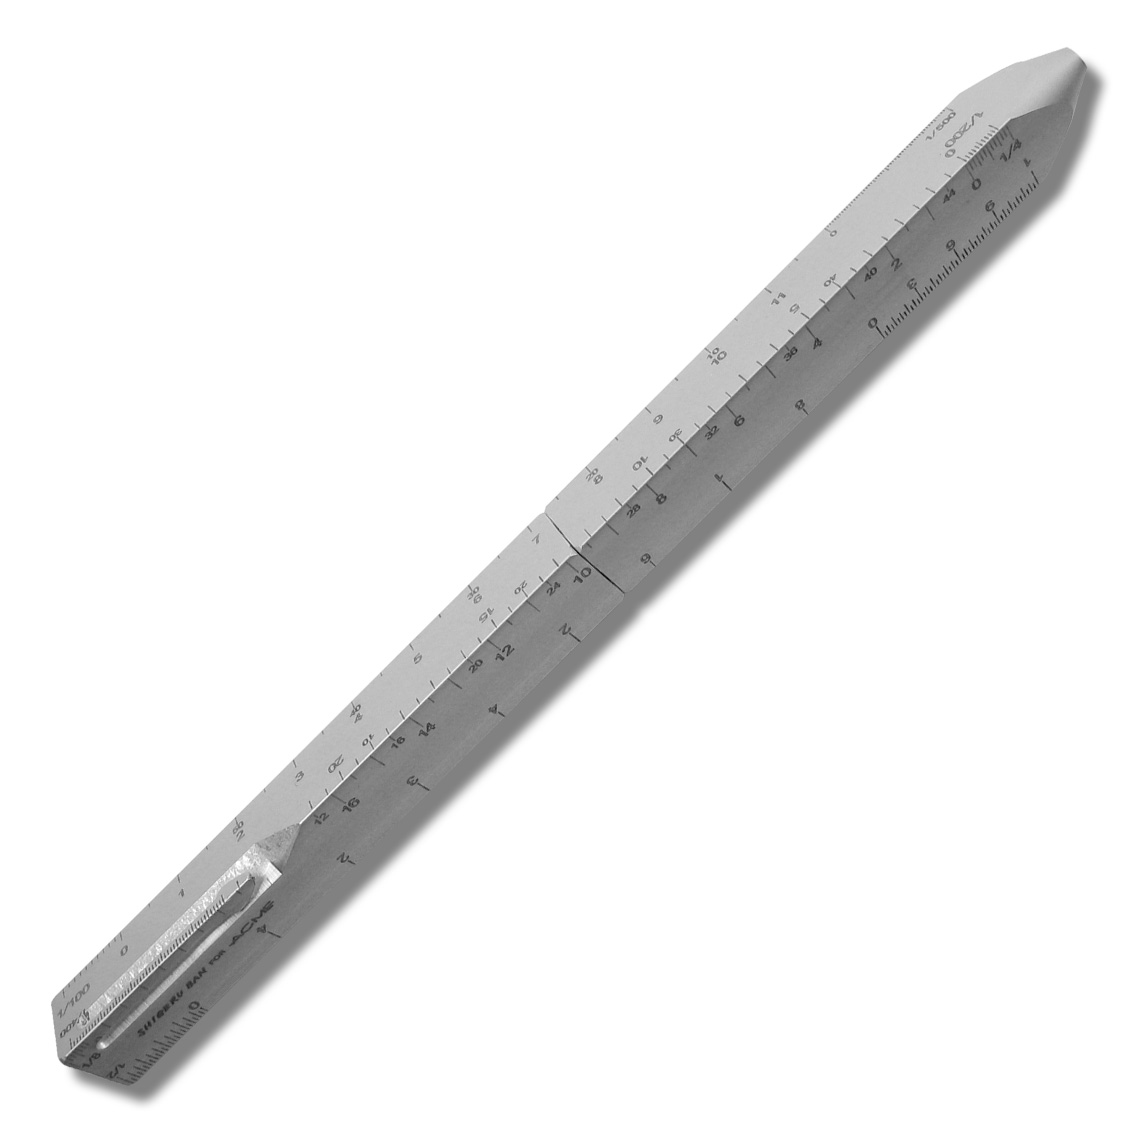 Acme P2SB01RB Scale Ball Point Pen